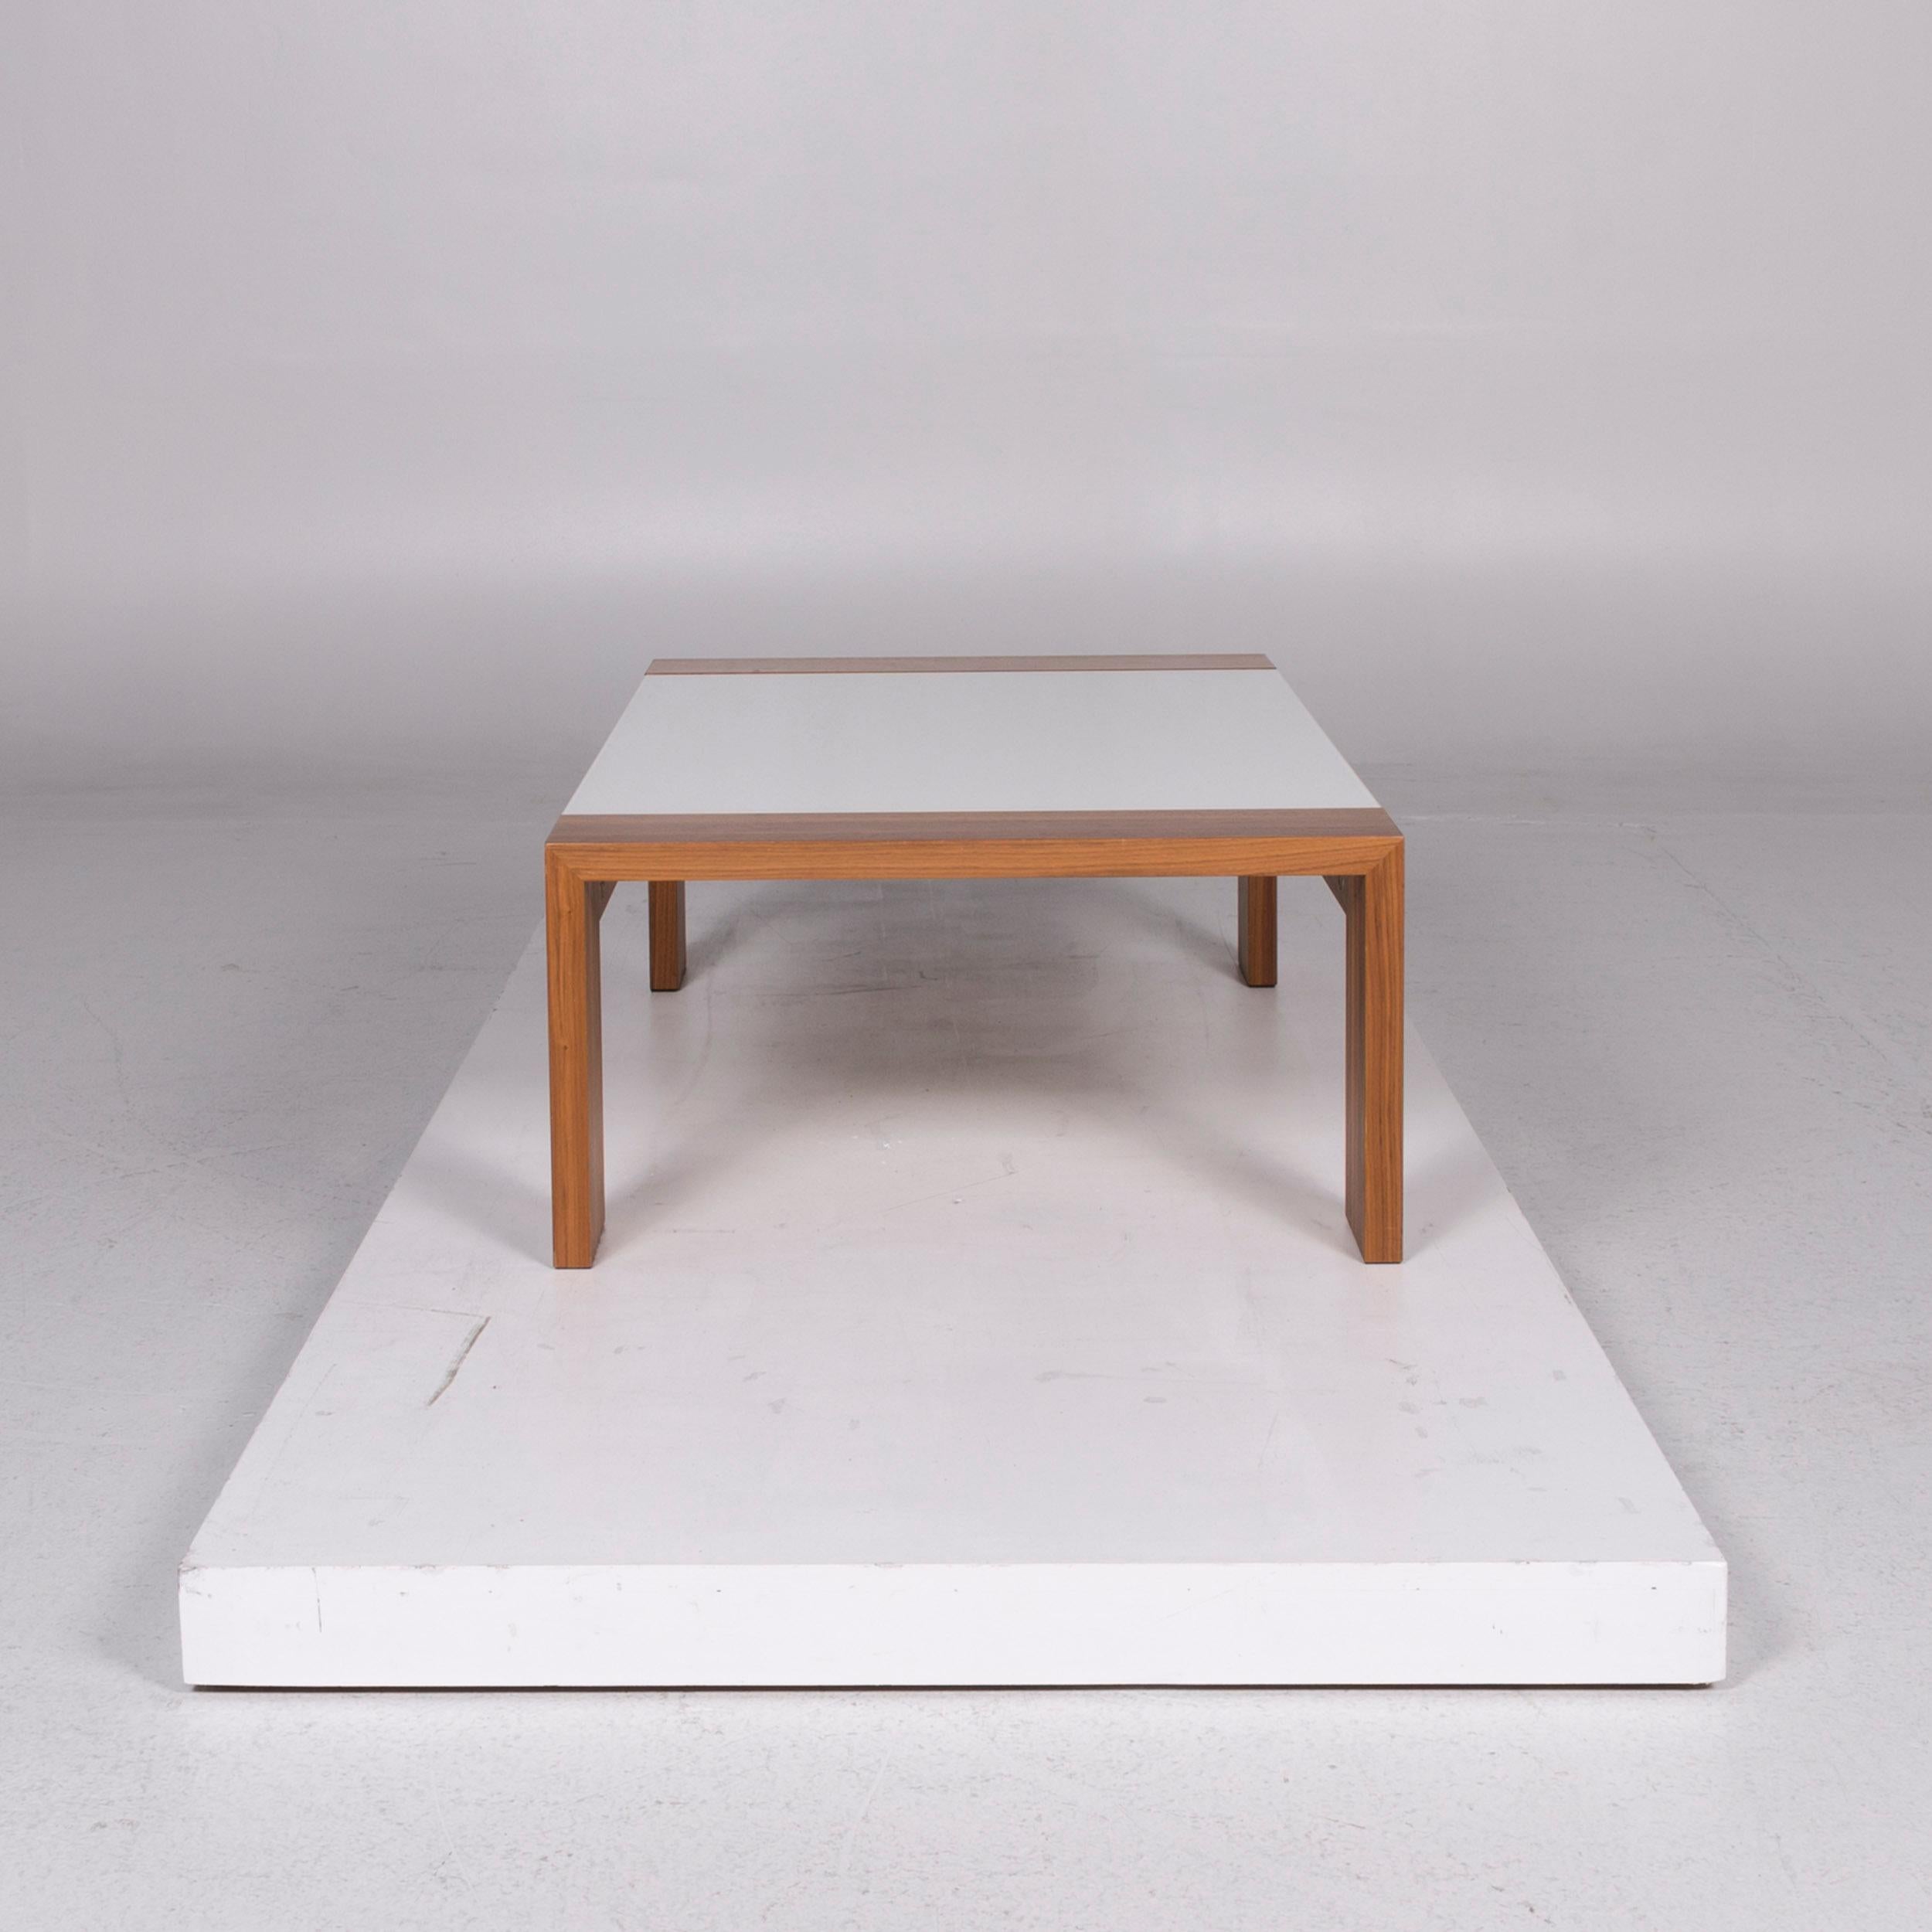 Contemporary Hülsta Wood Glaz Coffee Table Brown Table